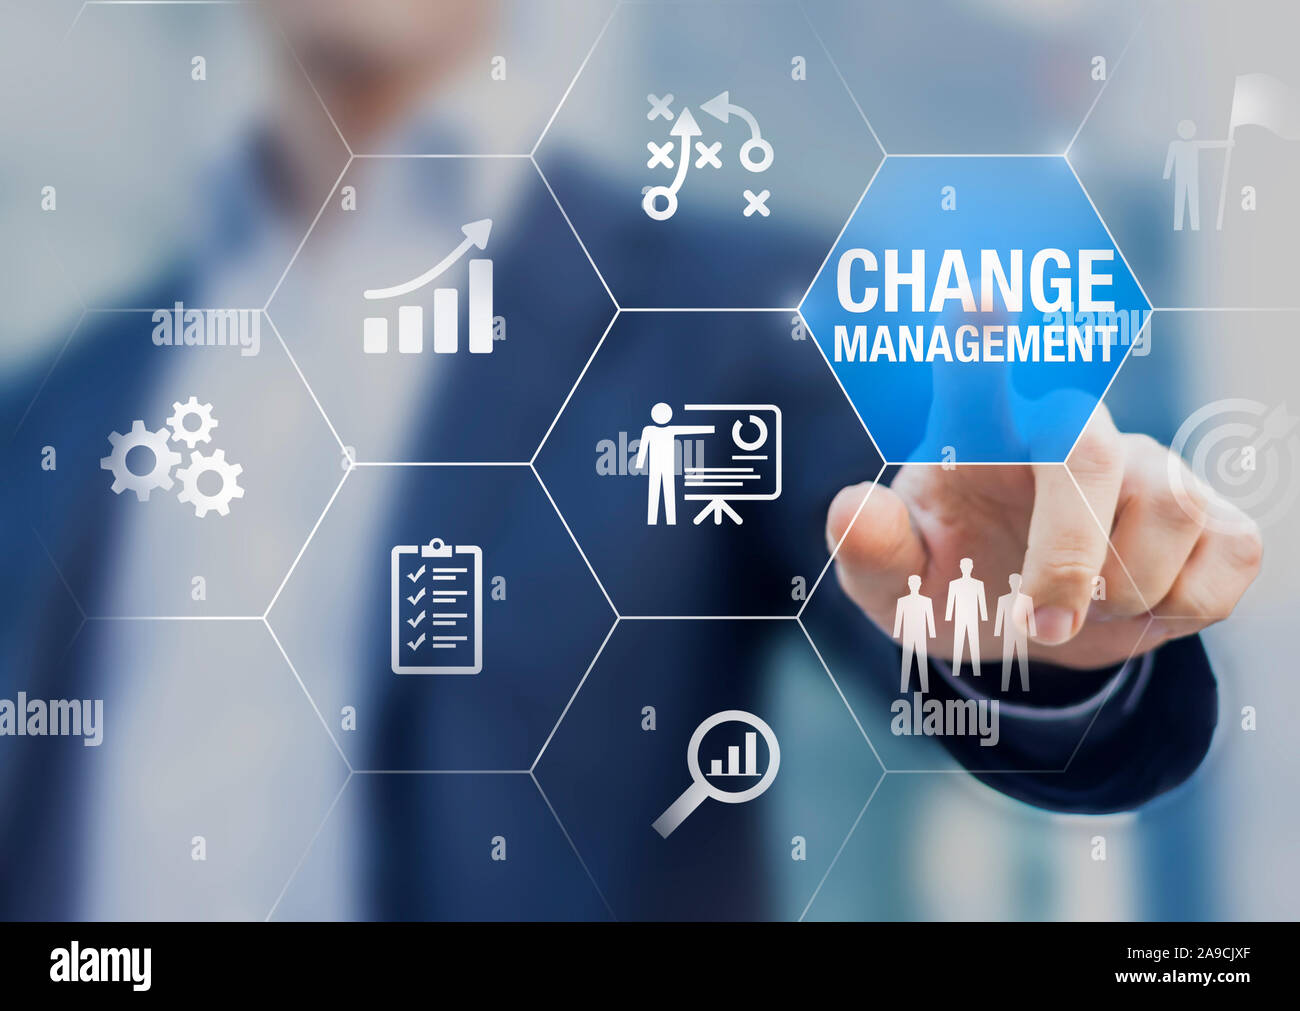 Change management in organization and business concept with consultant presenting icons of strategy, plan, implementation, communication, team, succes Stock Photo